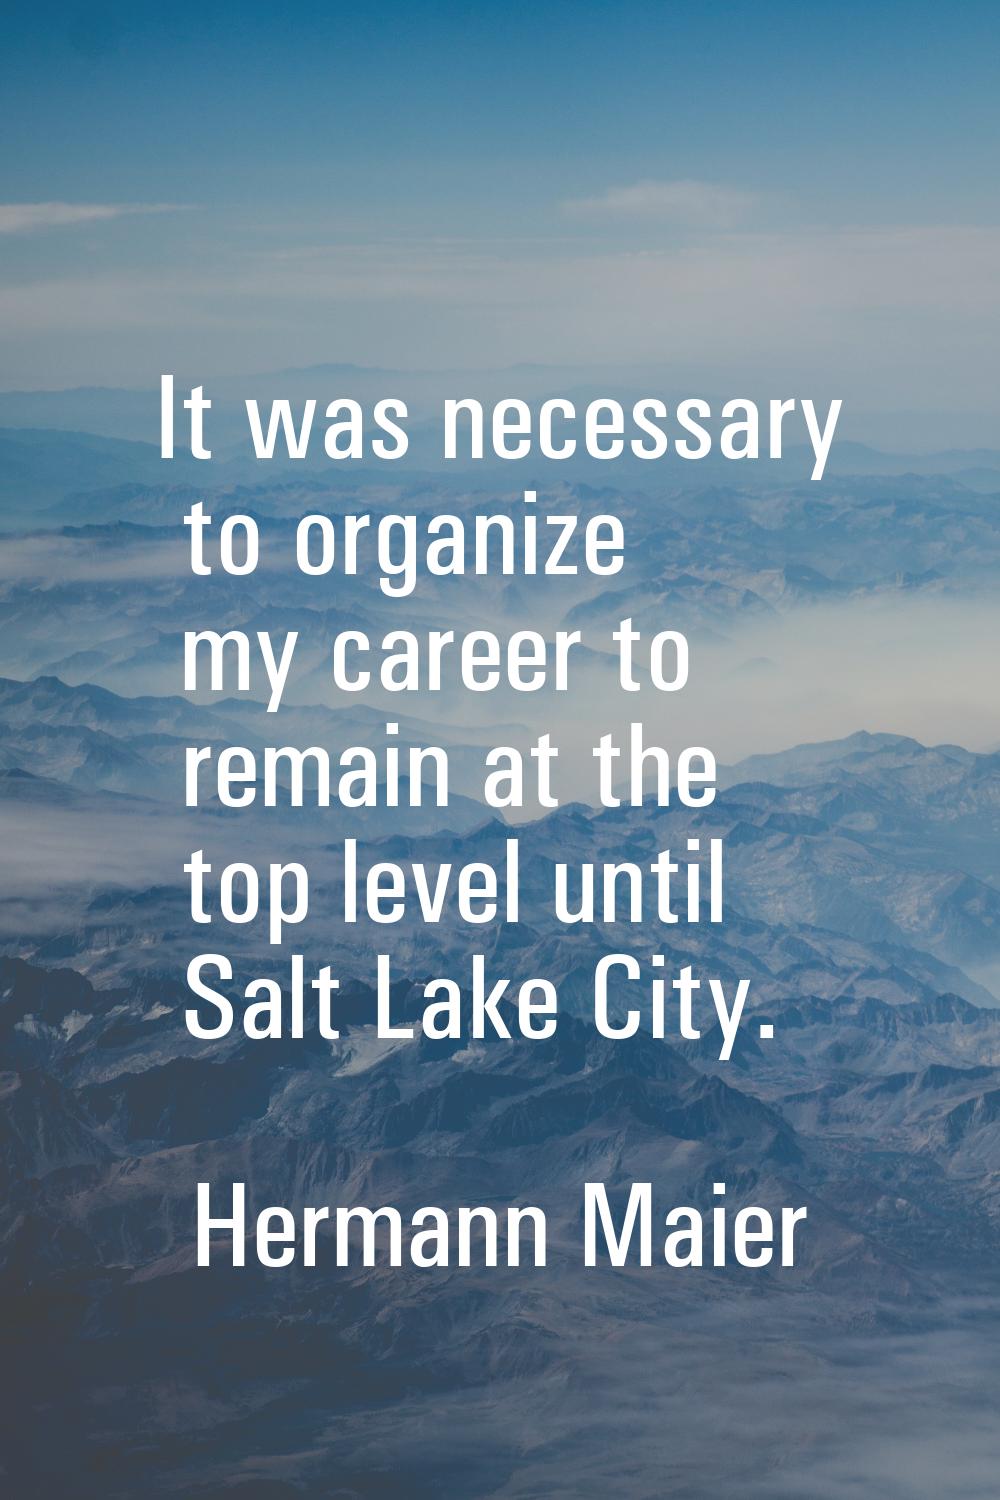 It was necessary to organize my career to remain at the top level until Salt Lake City.